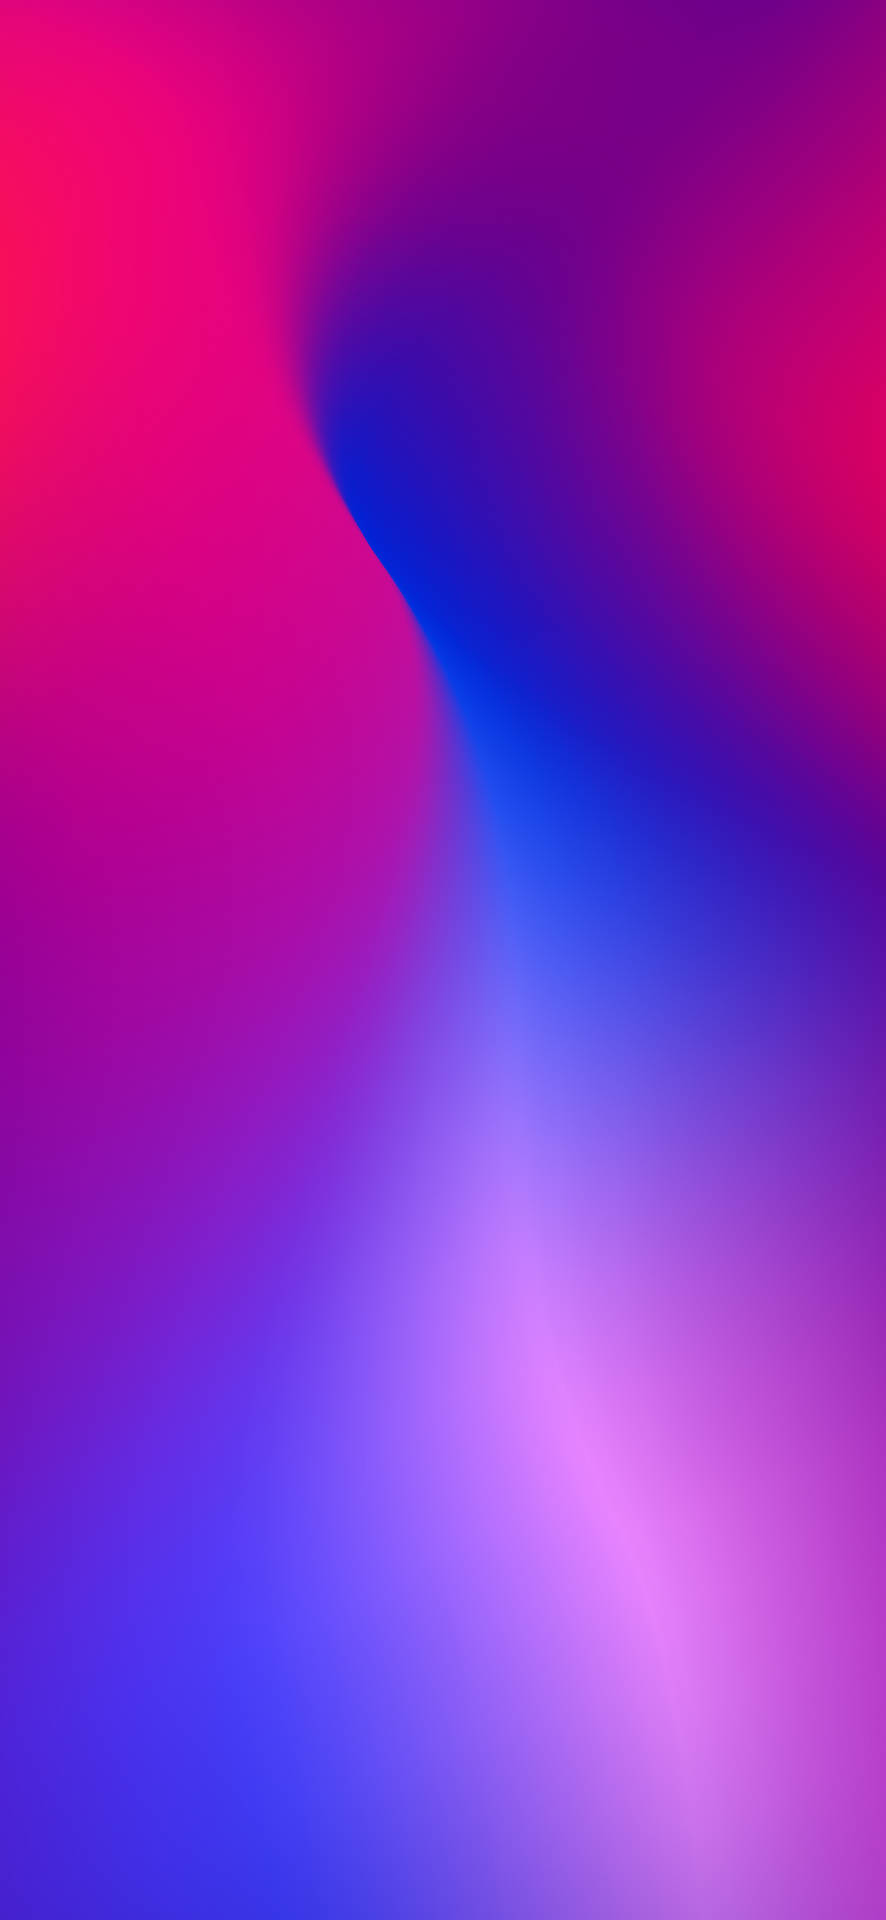 (this Is The Direct Translation Of The Sentence. In Swedish, We Usually Place The Adjective After The Noun, So This Is The Correct Order Of The Words. This Sentence Is Talking About The Color Gradient Of A Specific Mobile Phone Model, Oppo A5s.) Wallpaper